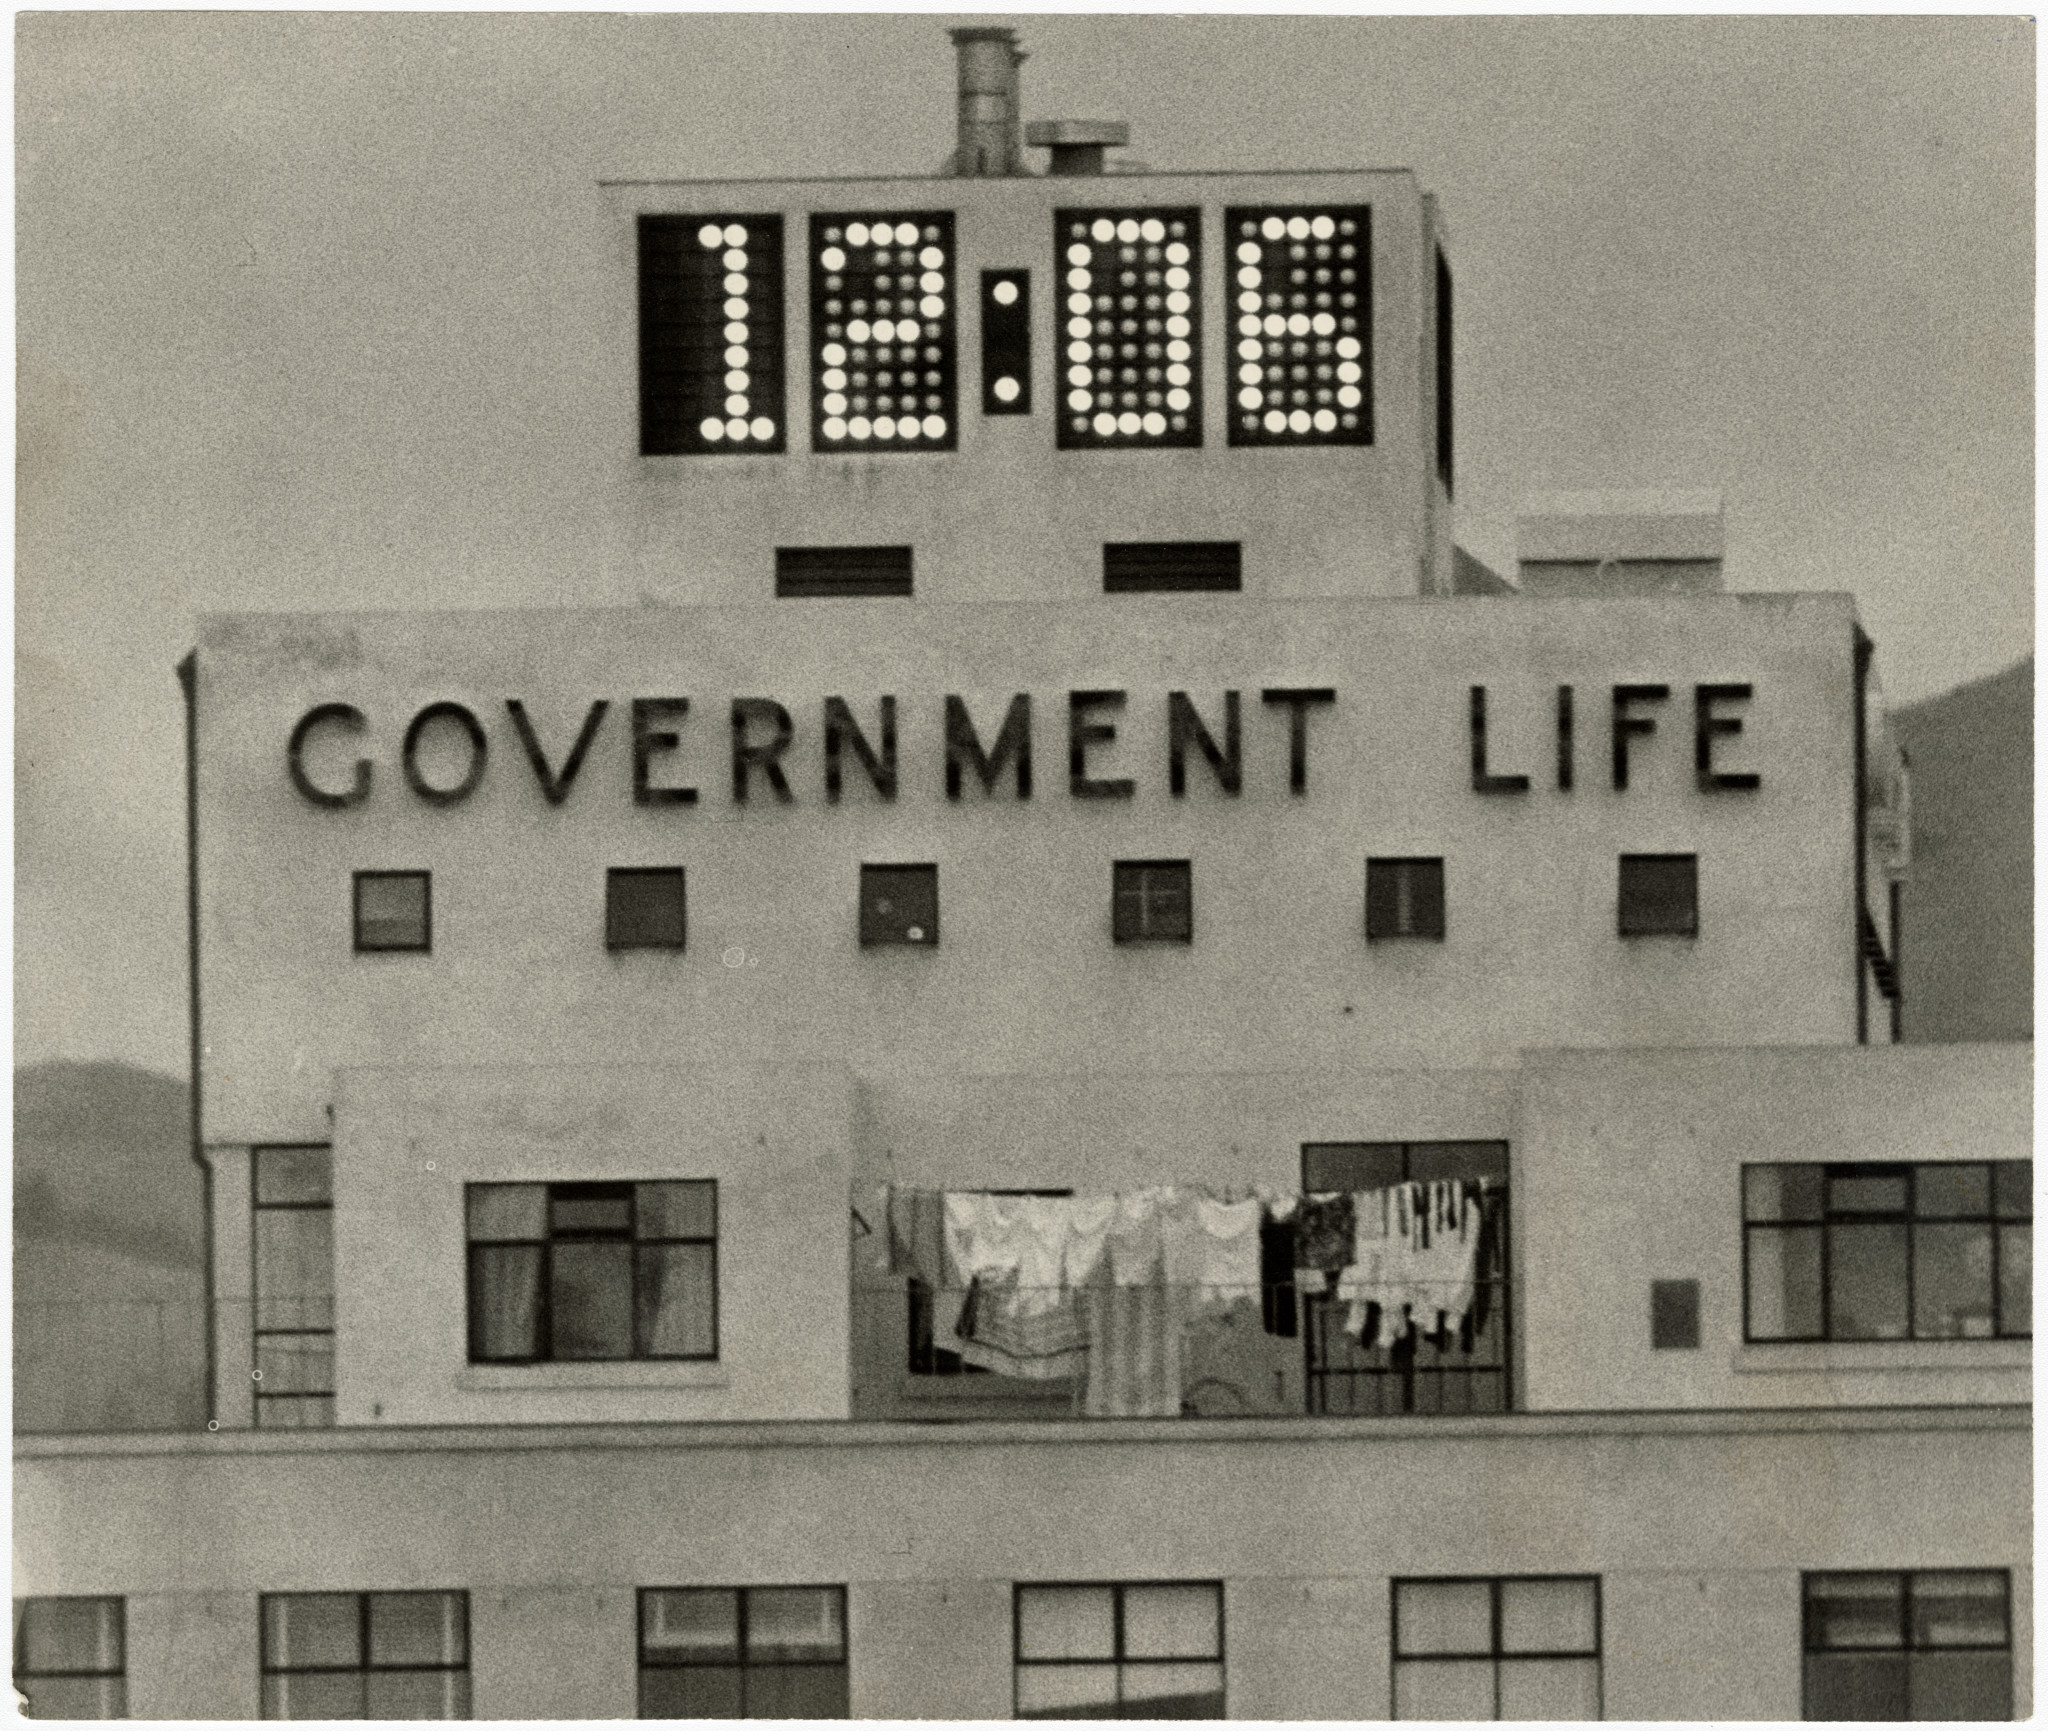 Government Life building clock